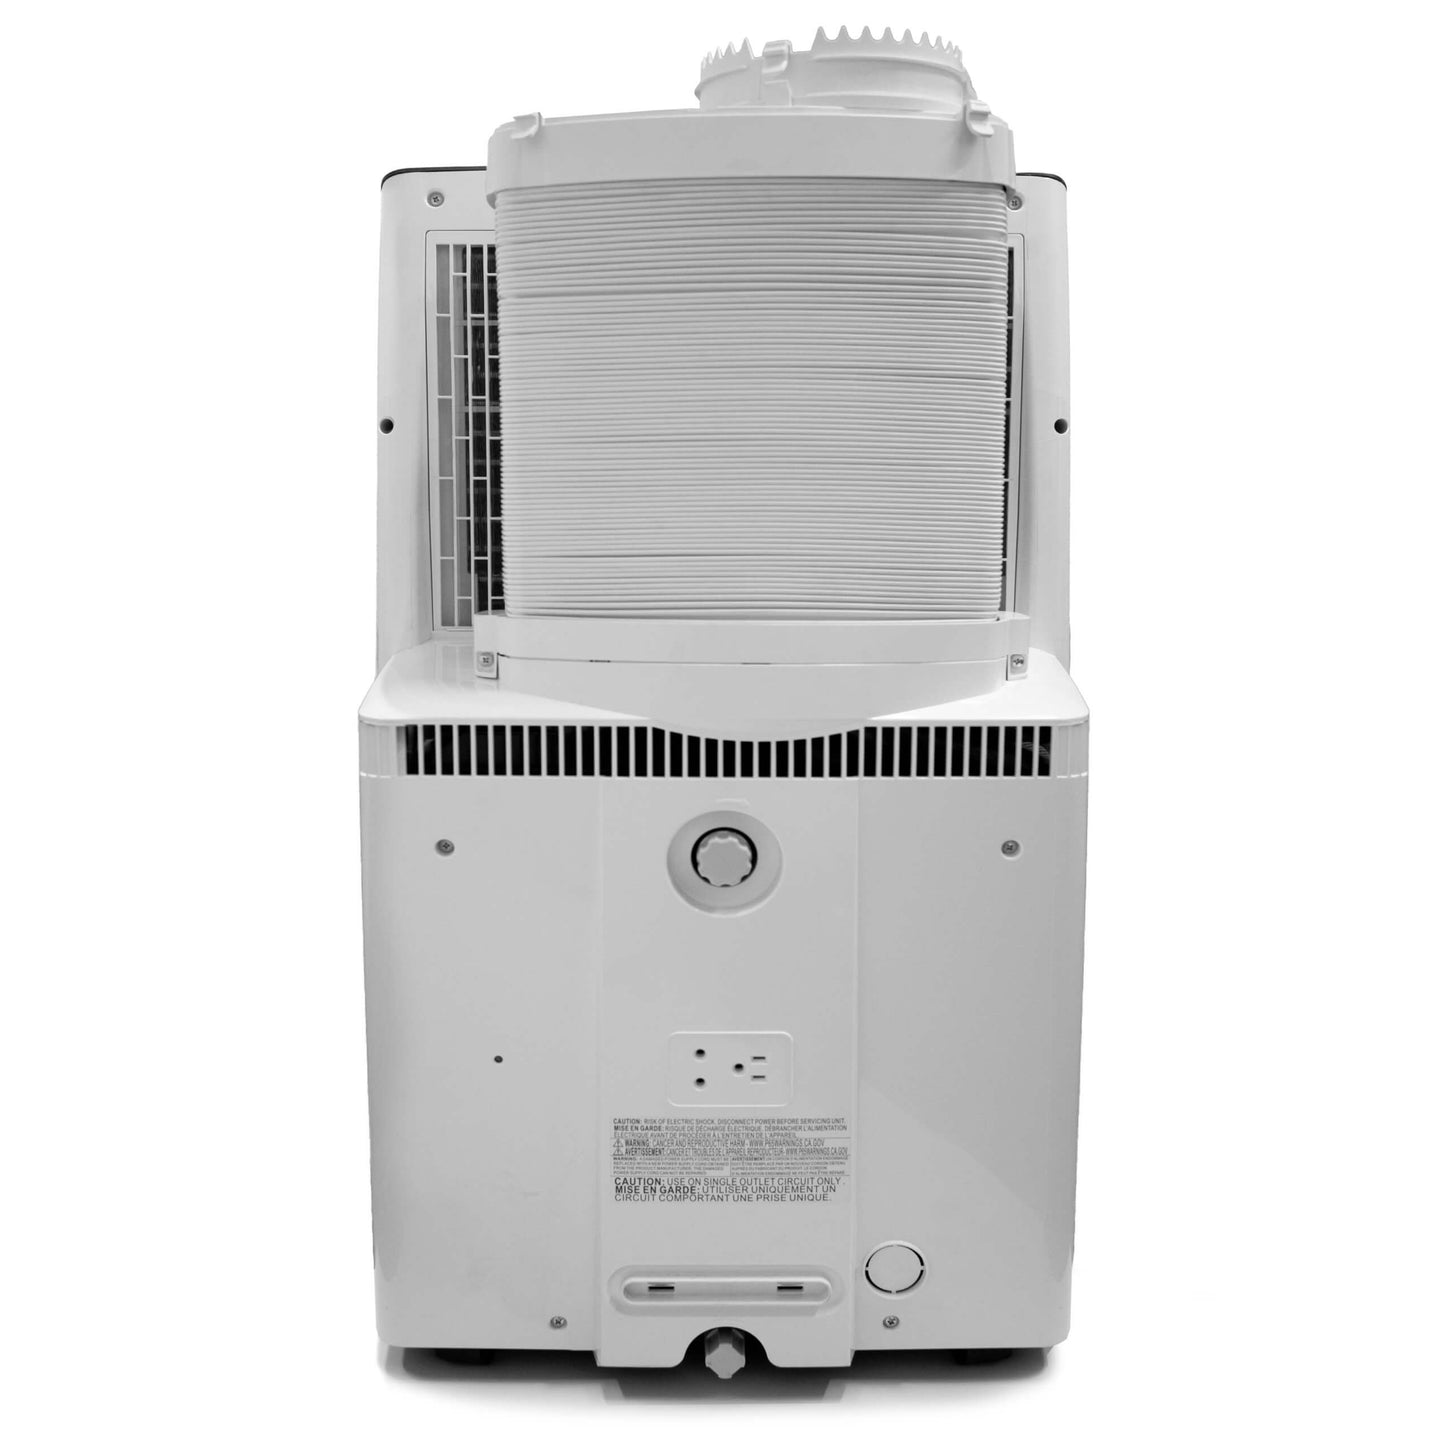 Whynter Air Conditioners Whynter ARC-1230WNH 14,000 BTU (12,000 BTU SACC) NEX Inverter Dual Hose Cooling Portable Air Conditioner, Heater, Dehumidifier, and Fan with Smart Wi-Fi, up to 600 sq ft in White